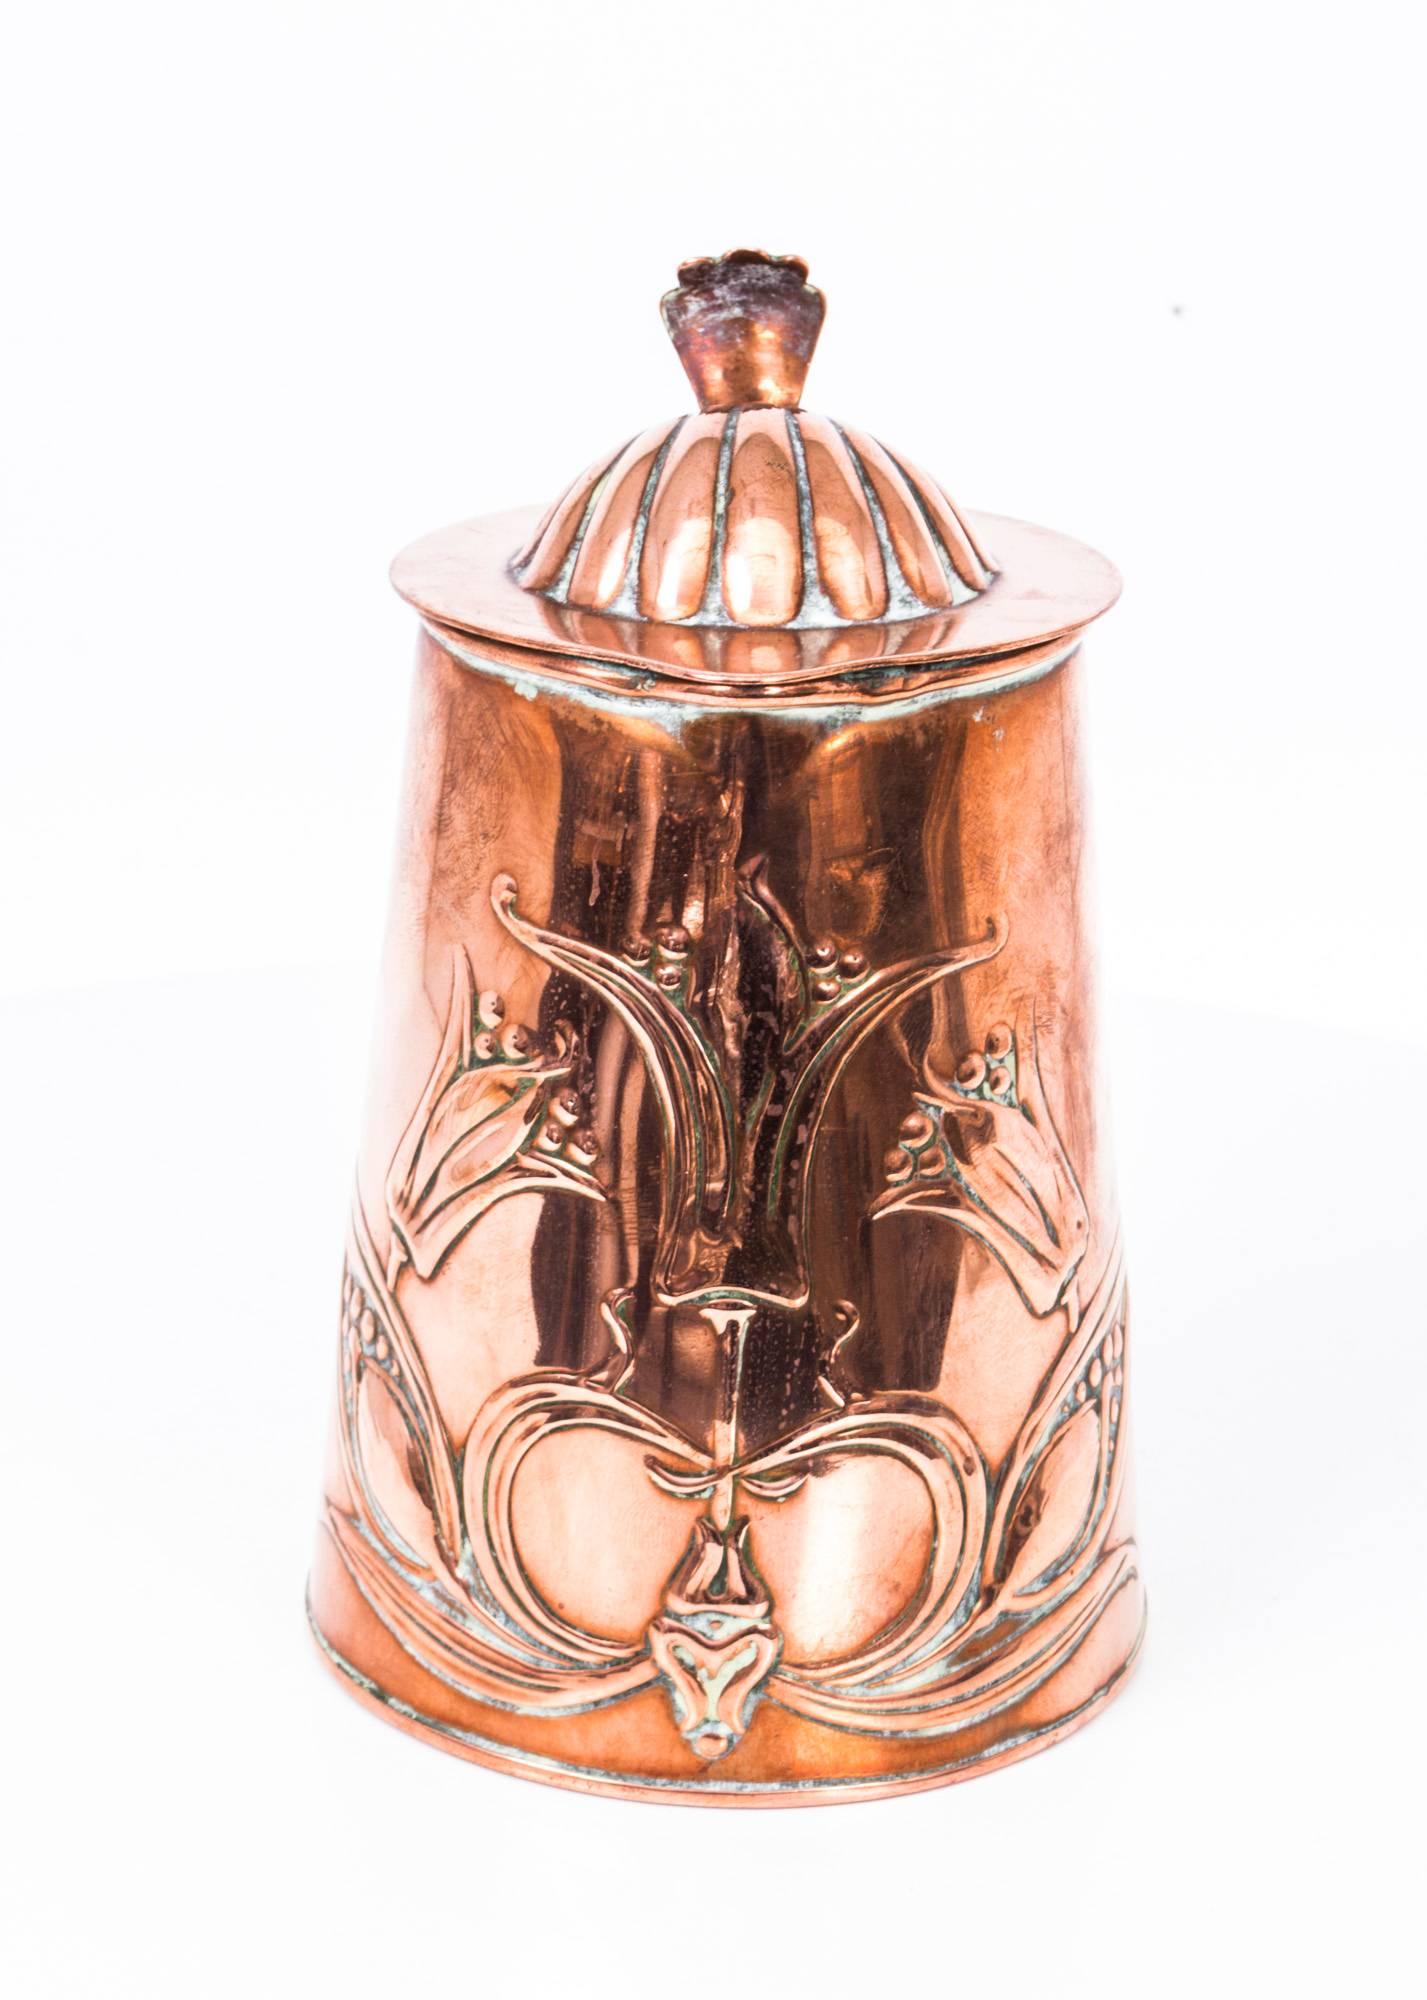 This is a wonderful antique English Art Nouveau Edwardian copper lidded jug by Joseph Sankey & Sons, circa 1910 in date. 

The copper has wonderful art nouveau stylised floral decoration in low relief and a shell and handle in high relief